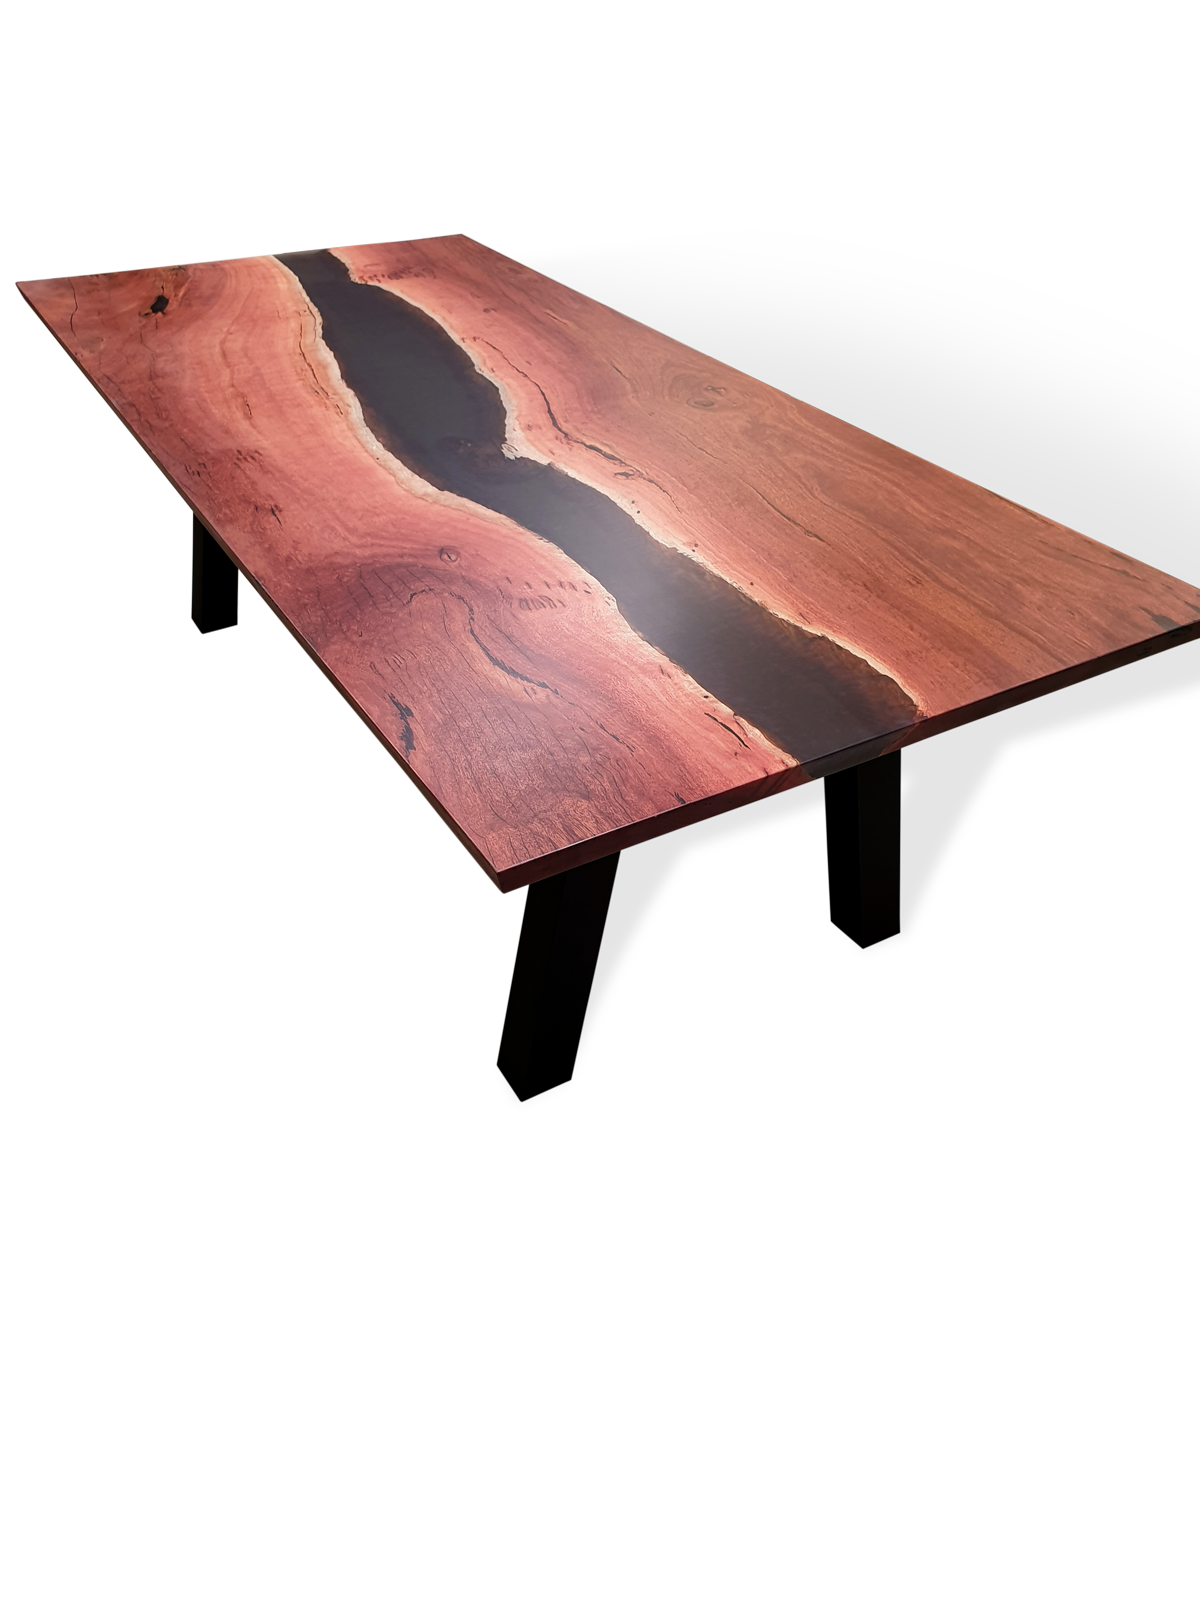 FLOREAT-RIVER-RESIN-TABLE